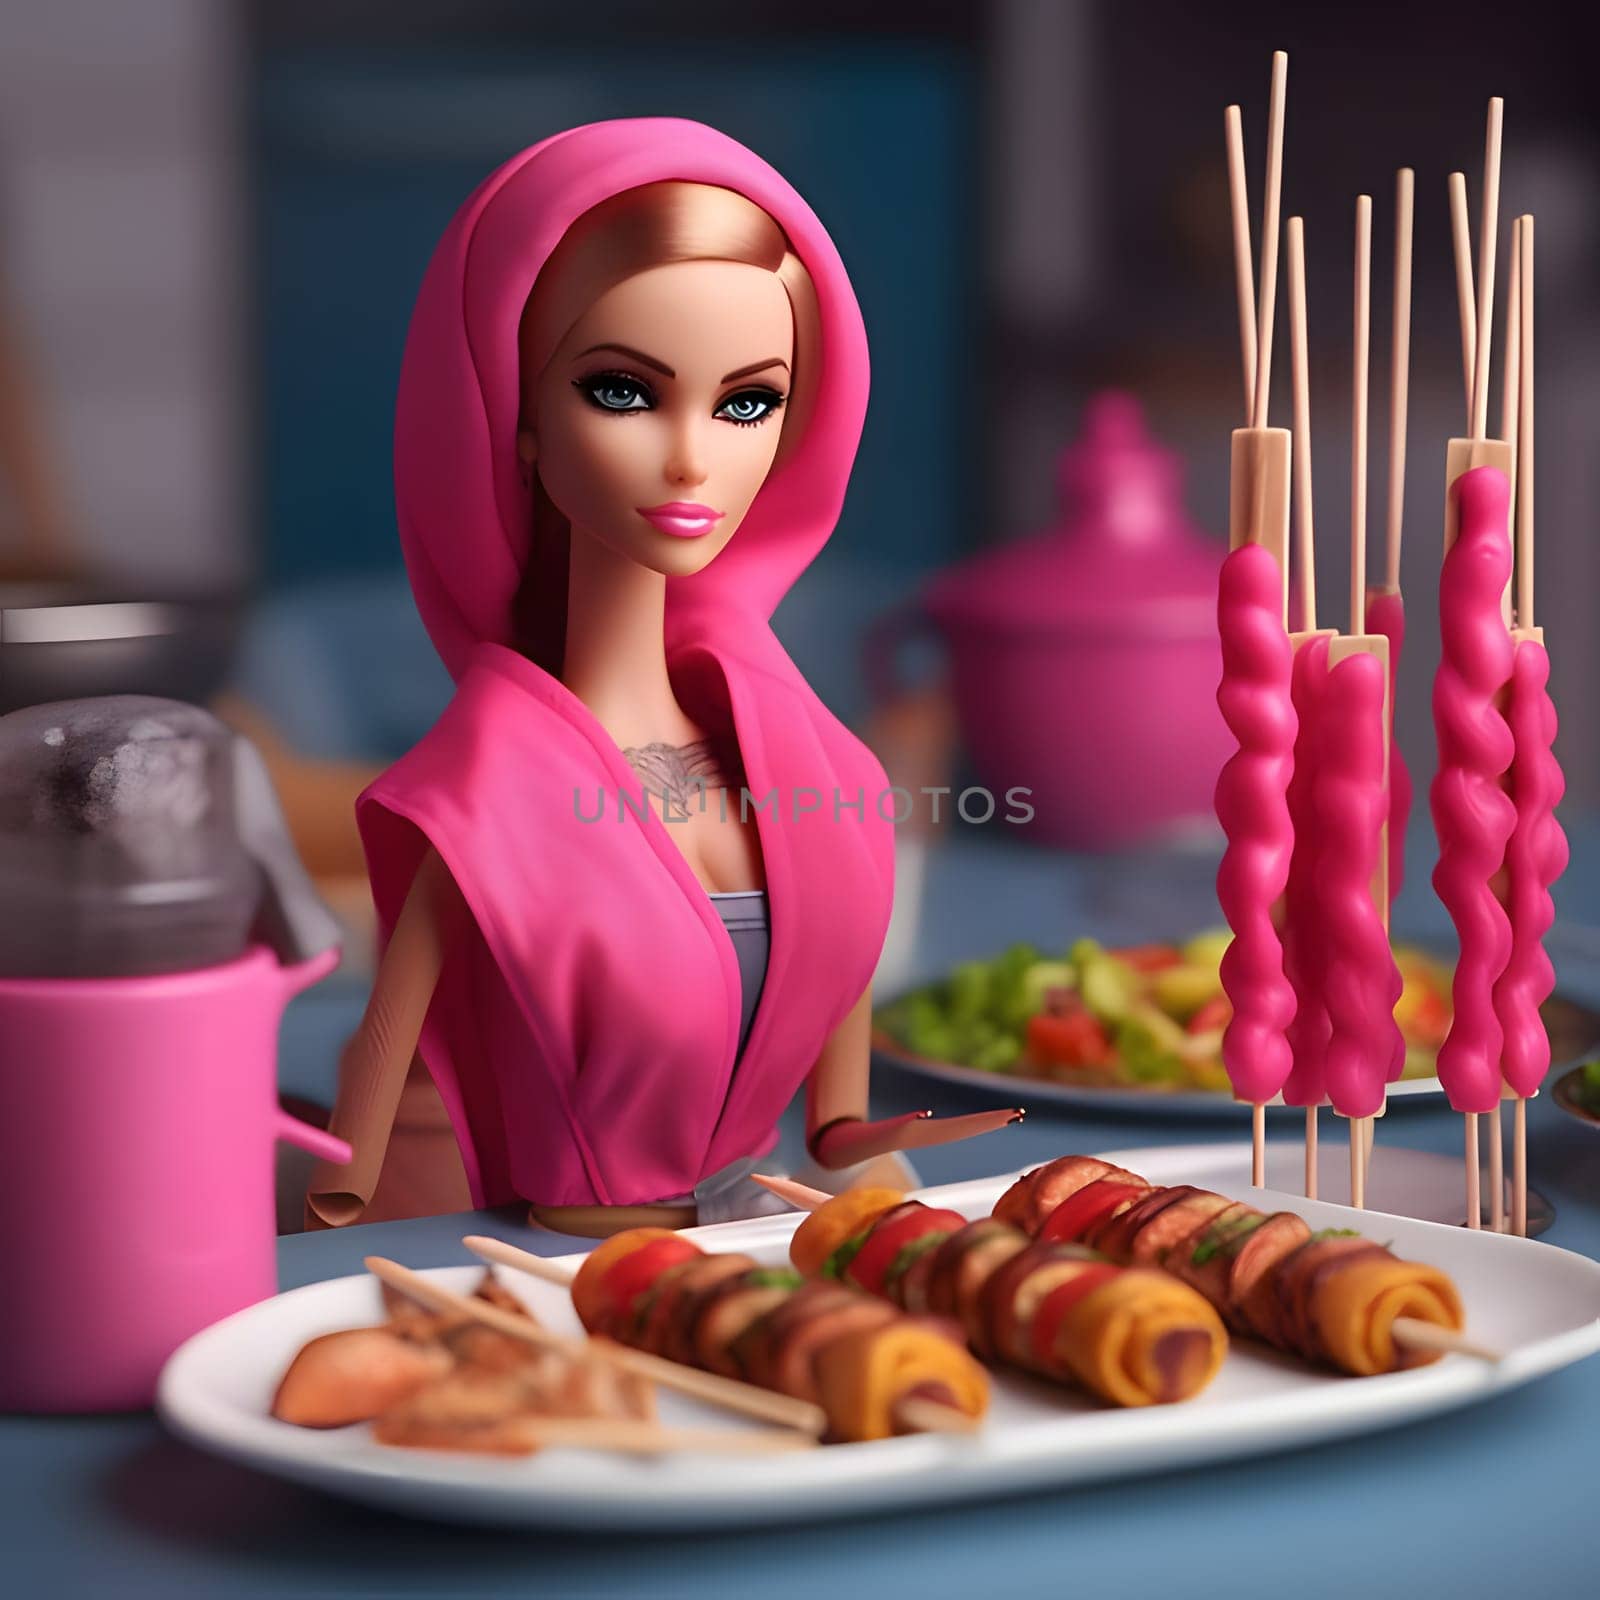 Charming blonde Barbie, dressed in pink, with skewers on a plate, against a blurred background. The side view captures her delightful moment with tasty treats.